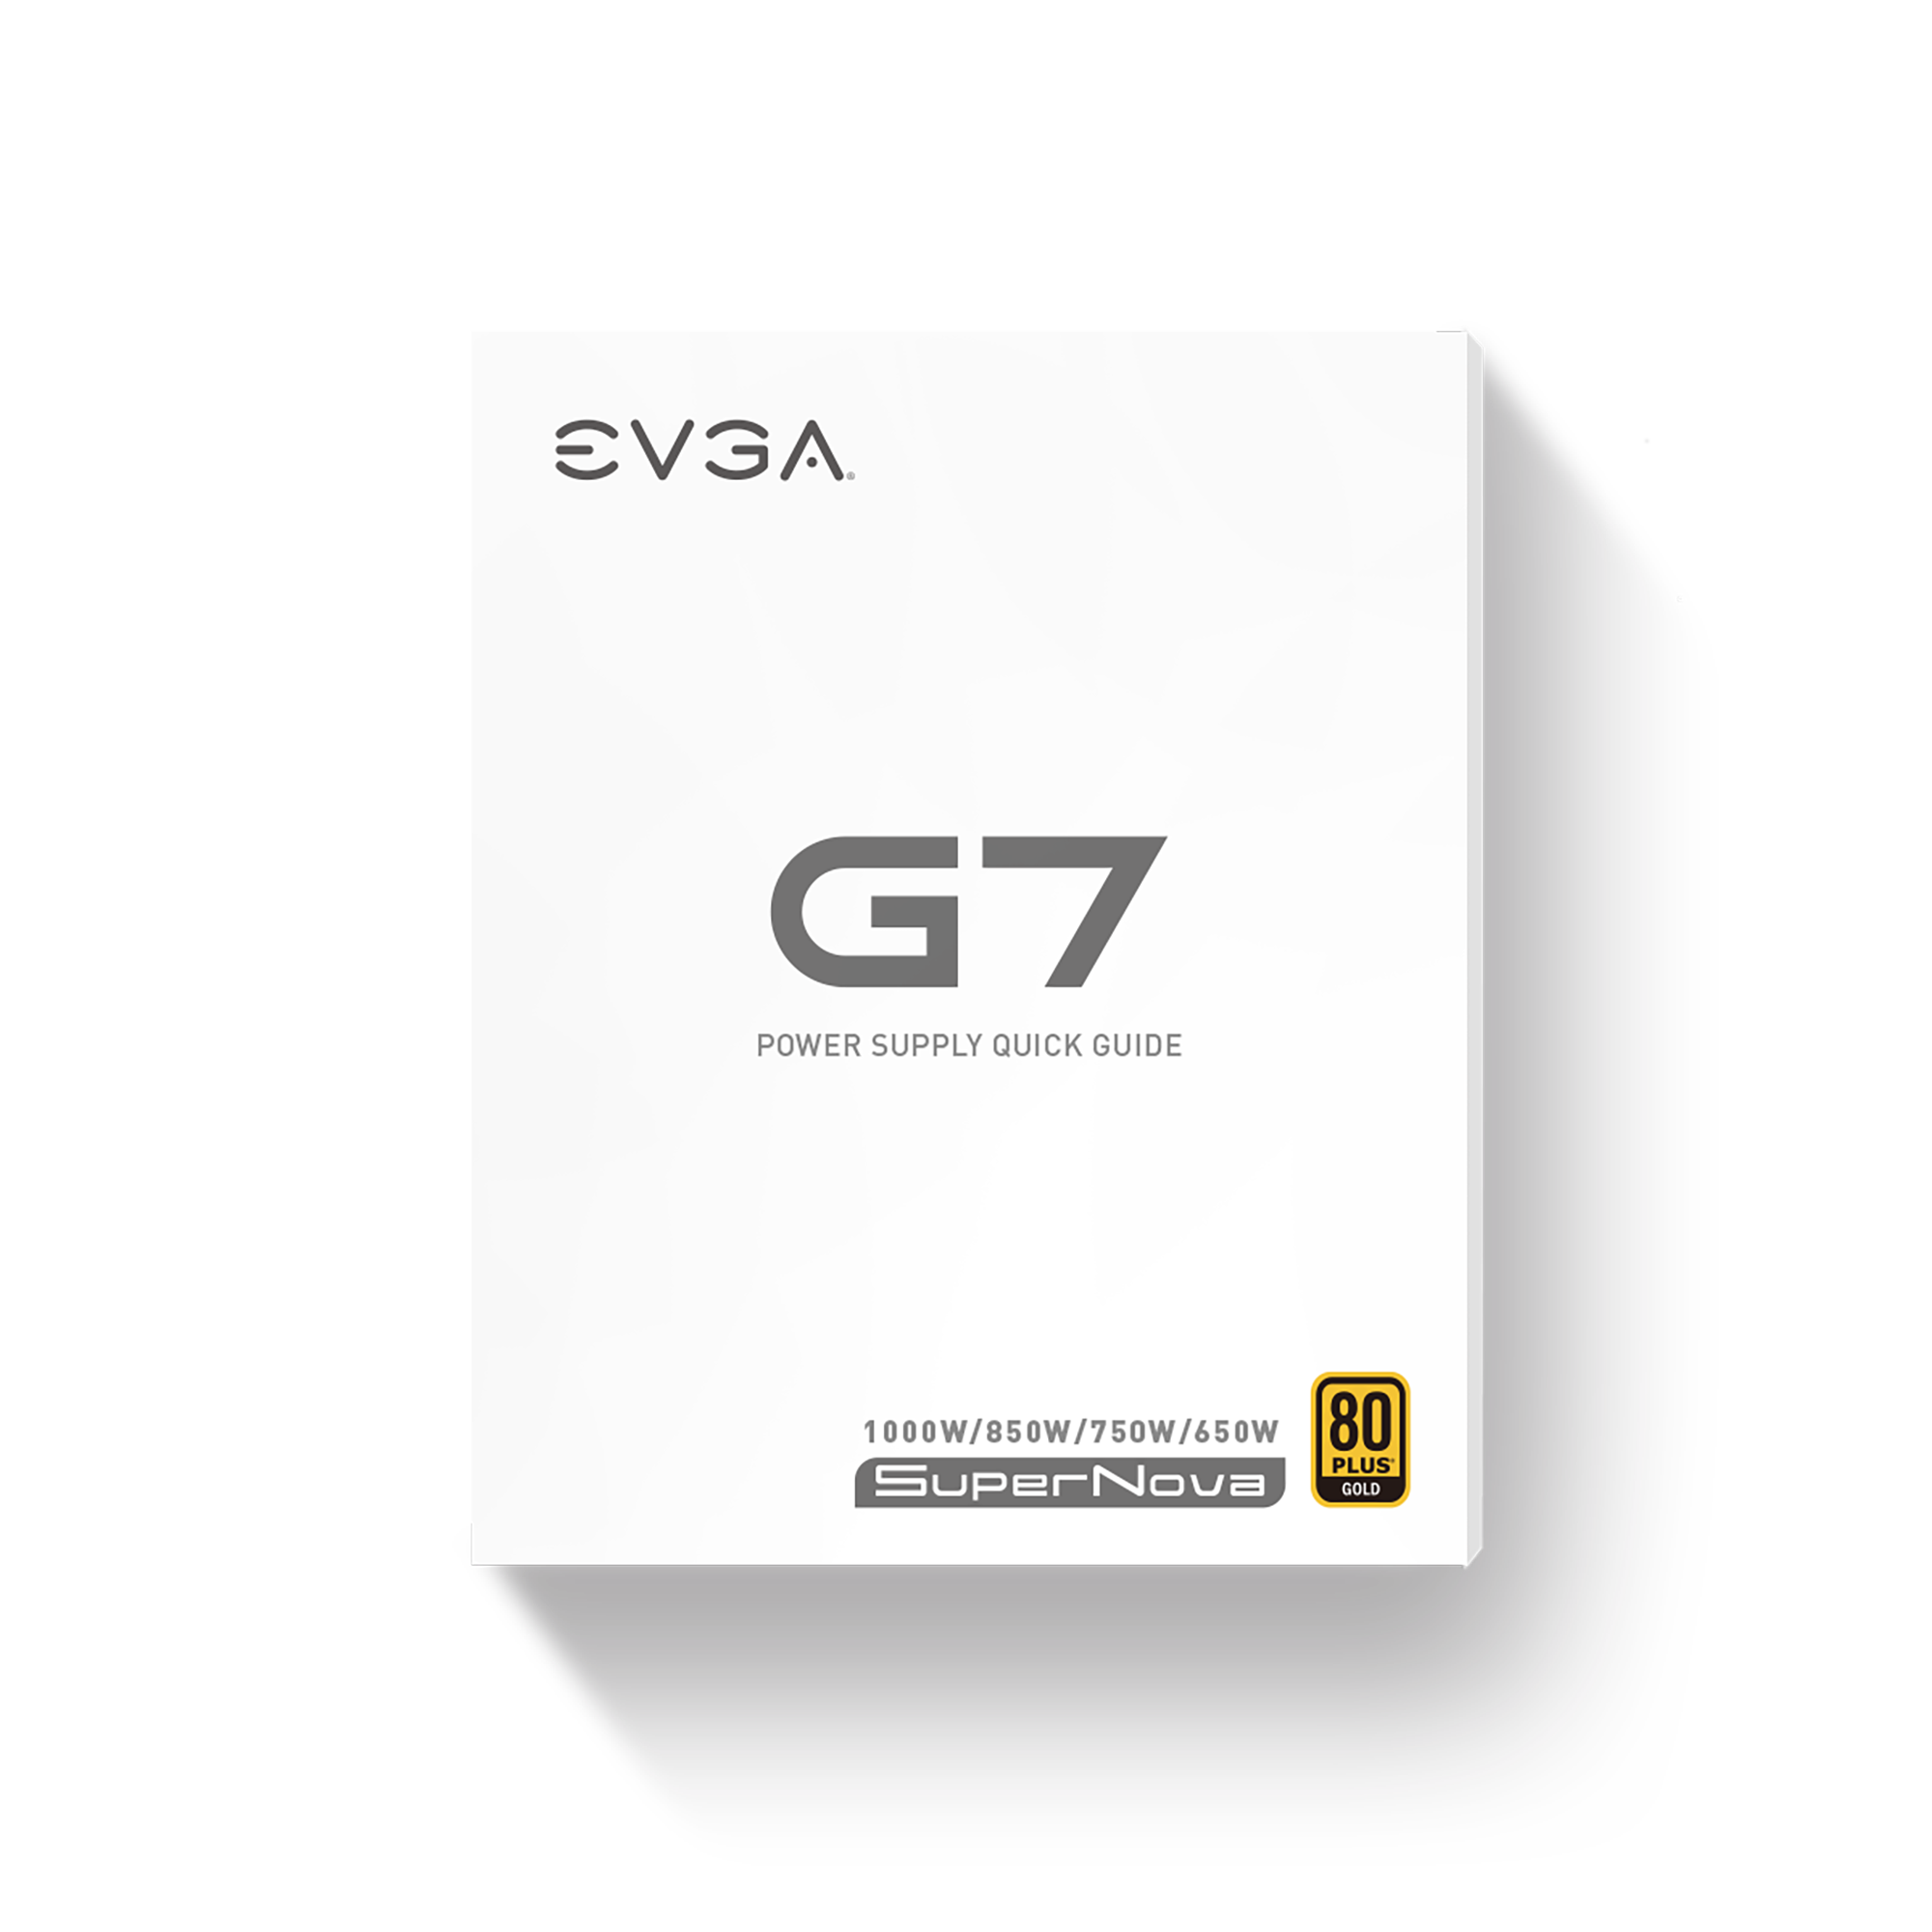 EVGA - Products - EVGA SuperNOVA 750 GM, 80 PLUS Gold 750W, Fully Modular,  ECO Mode with FDB Fan, 10 Year Warranty, Includes Power ON Self Tester, SFX  Form Factor, Power Supply 123-GM-0750-X1 - 123-GM-0750-X1